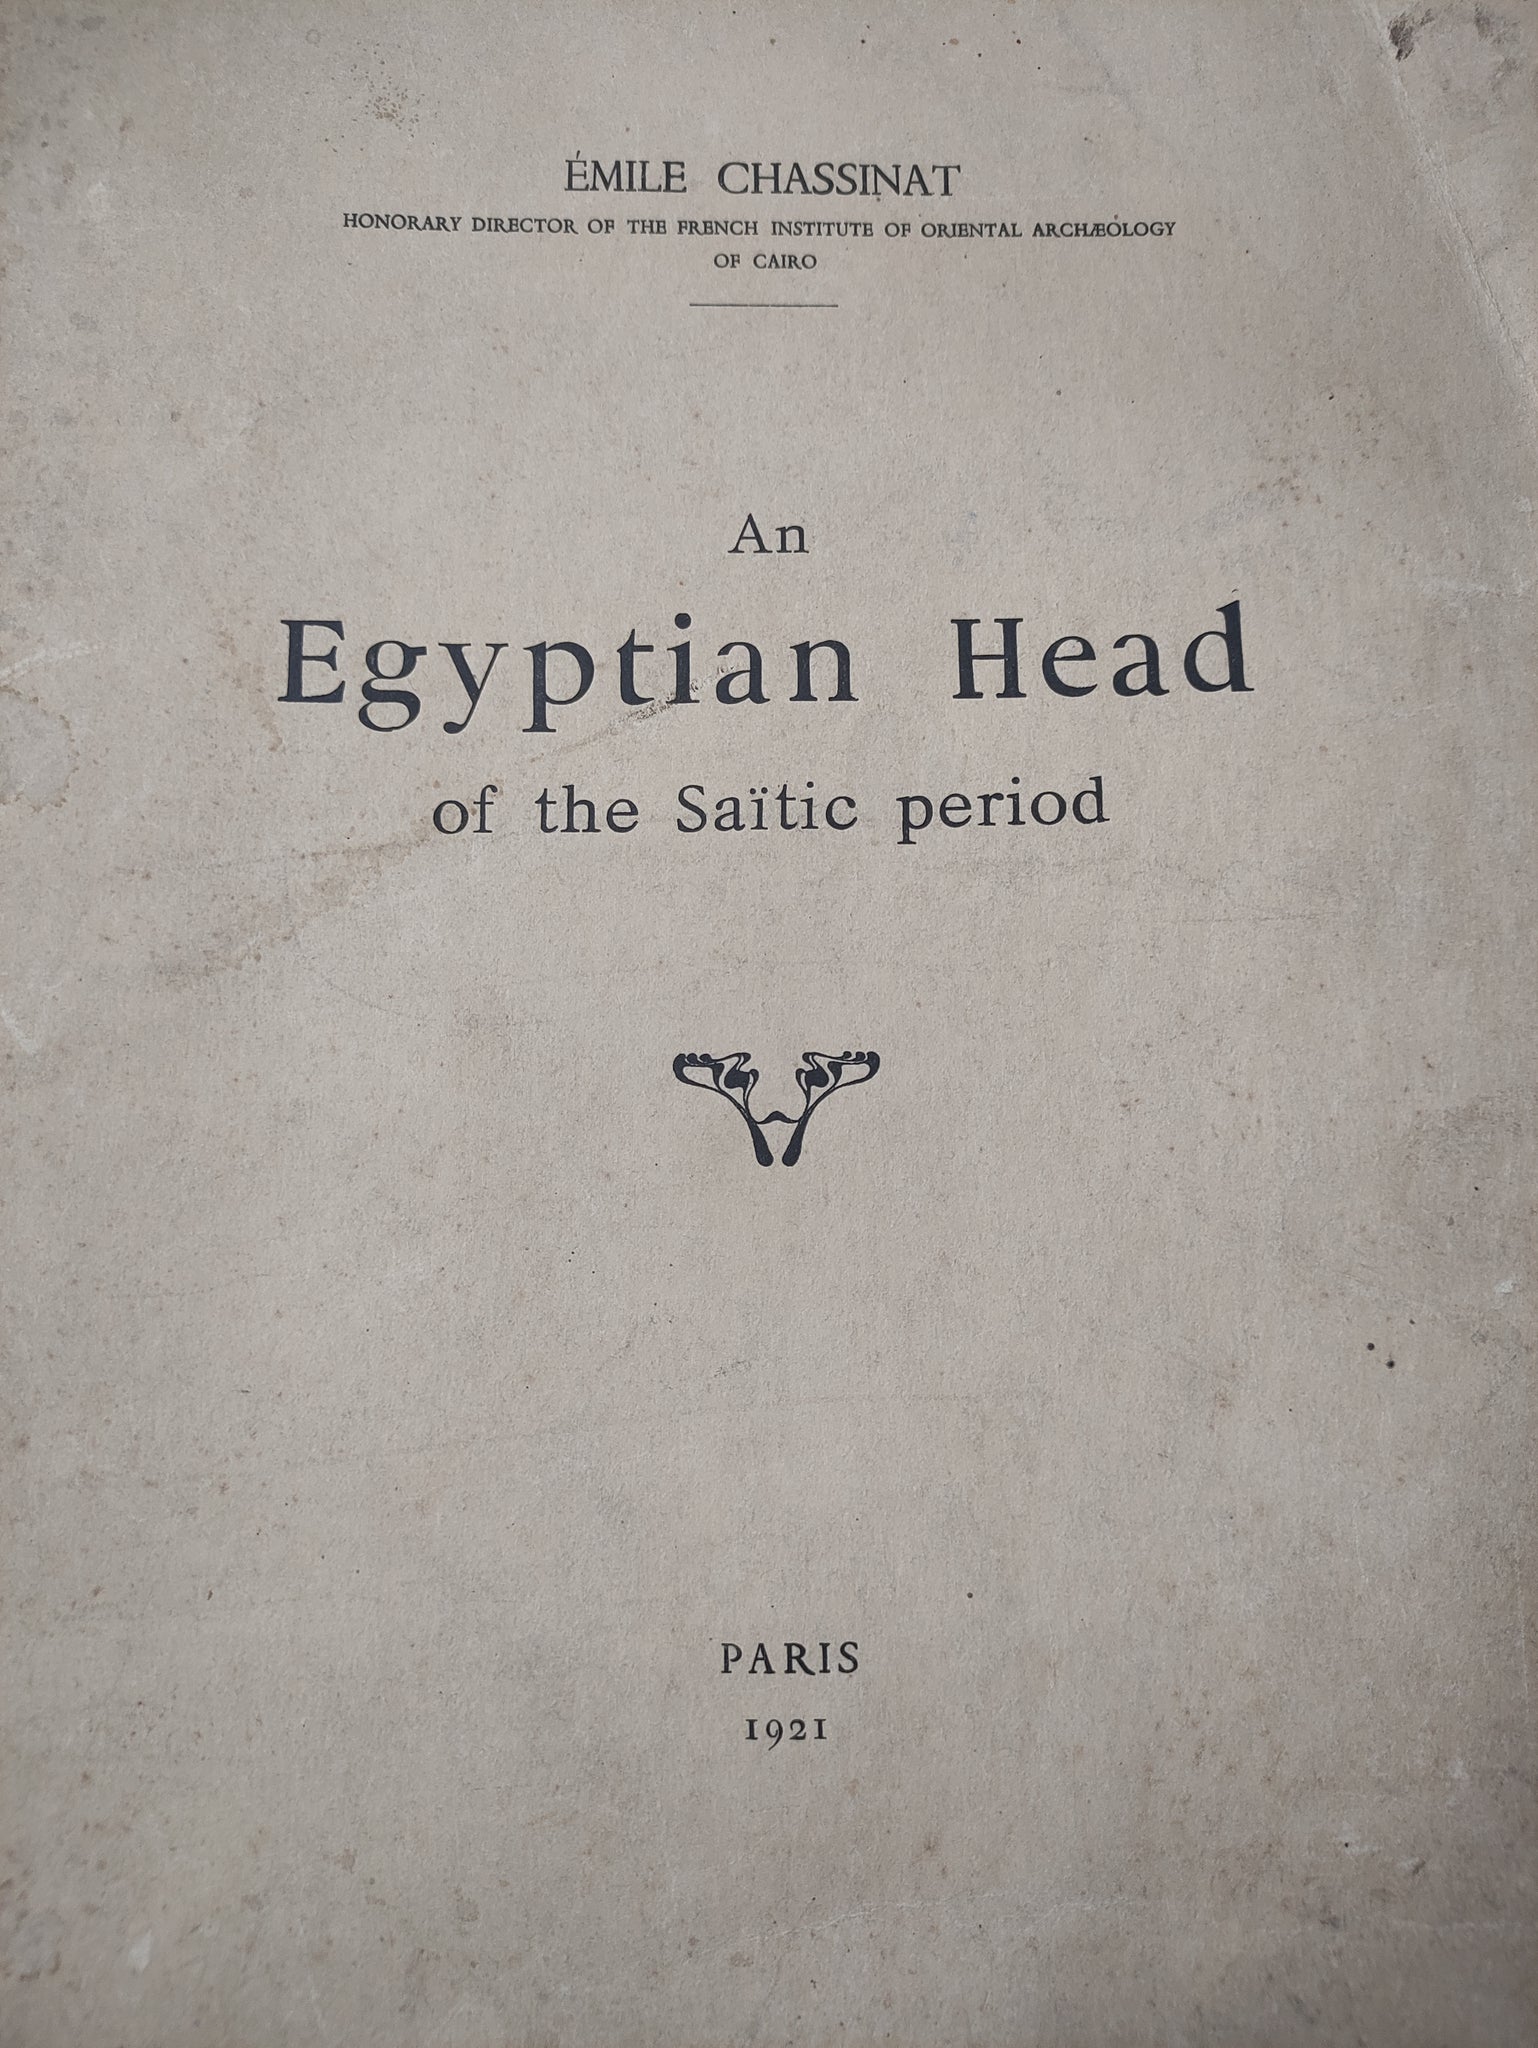 An Egyptian Head of the Saïtic period.